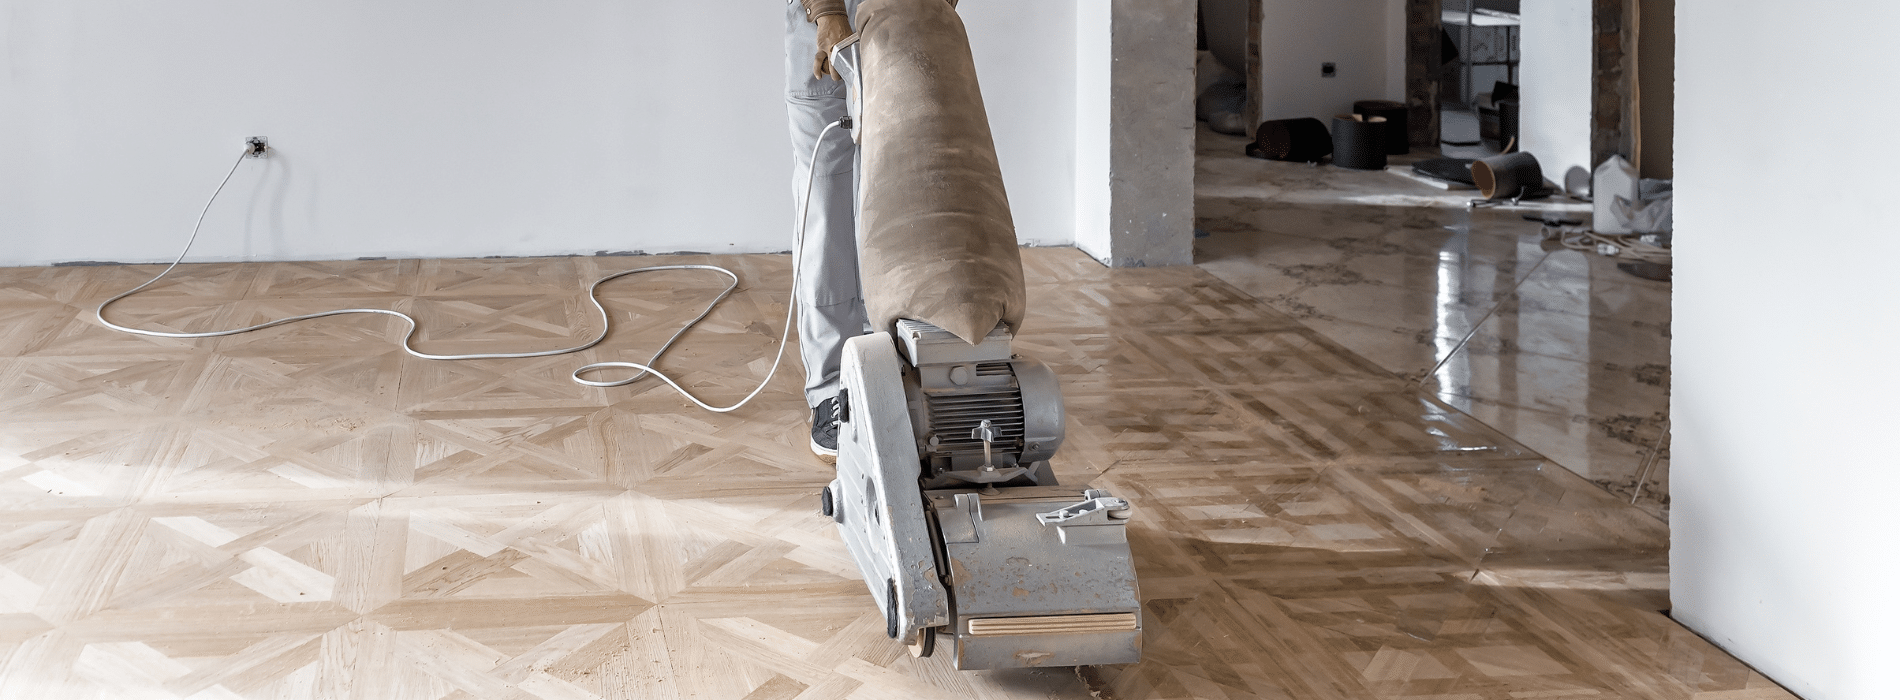 In Perivale, UB6, Expert herringbone floor sanding by Mr Sander® in process. Experience the power of Effect 2200 sander (Voltage: 230V, Frequency: 50Hz, Size: 200x750 mm) with HEPA-filtered dust extraction. Achieve clean and efficient results for your herringbone floor.